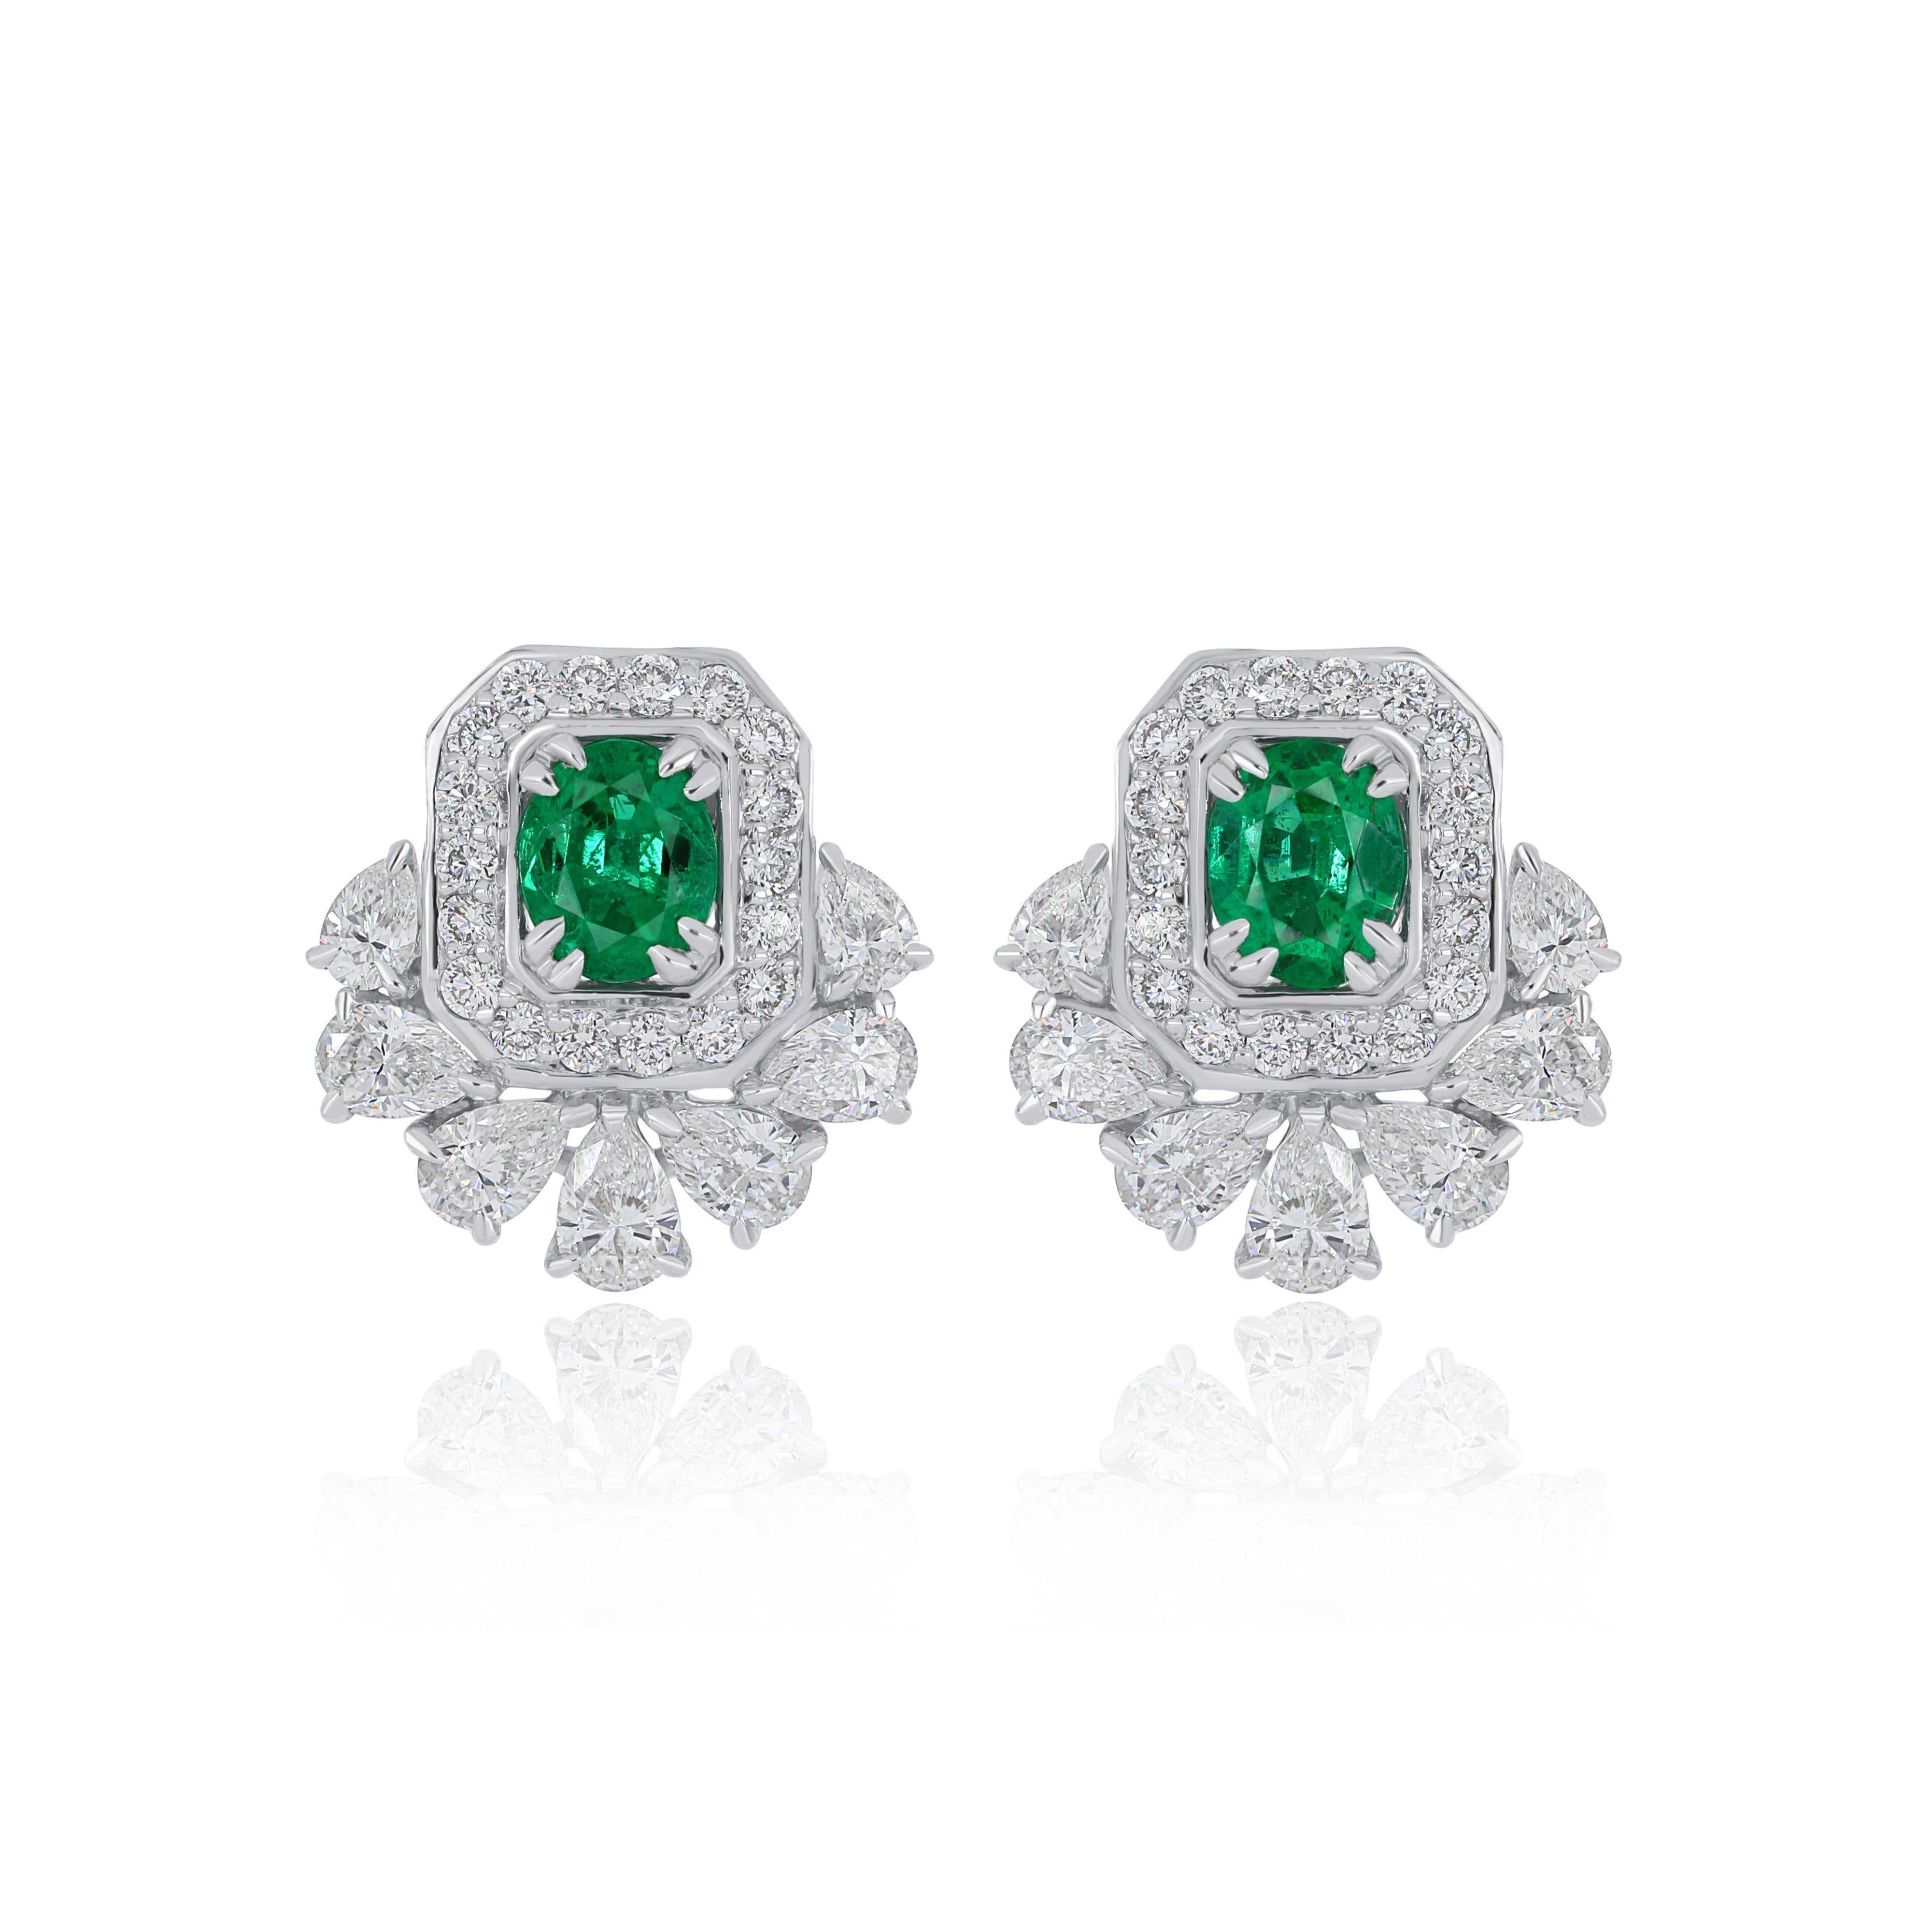 Emerald and Diamond Studded Earrings in 18 Karat White Gold Handcraft Jewelry